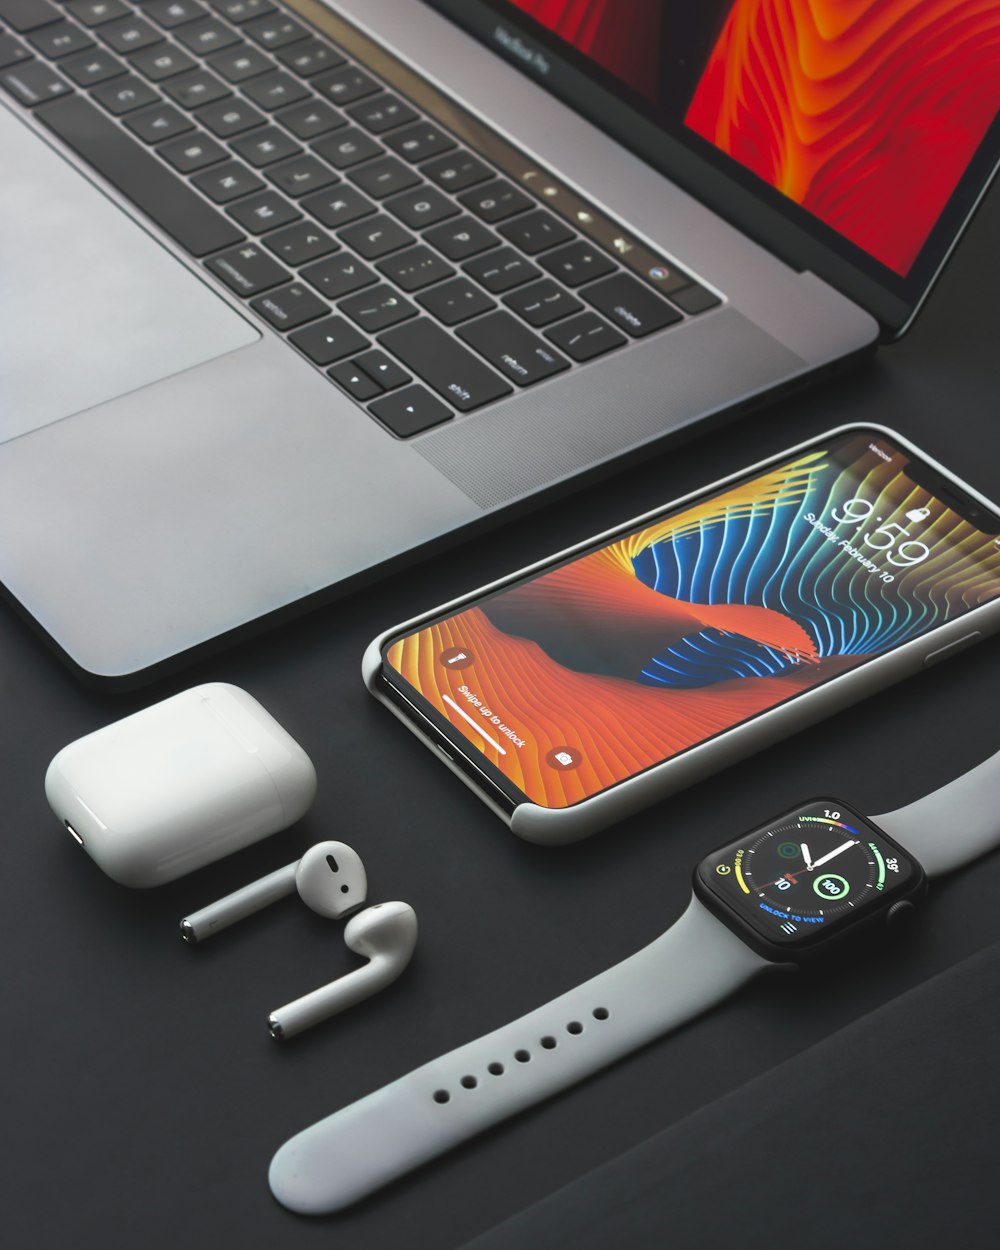 Space gray iphone x turned on beside apple airpods and charging case photo  – Free Electronics Image on Unsplash